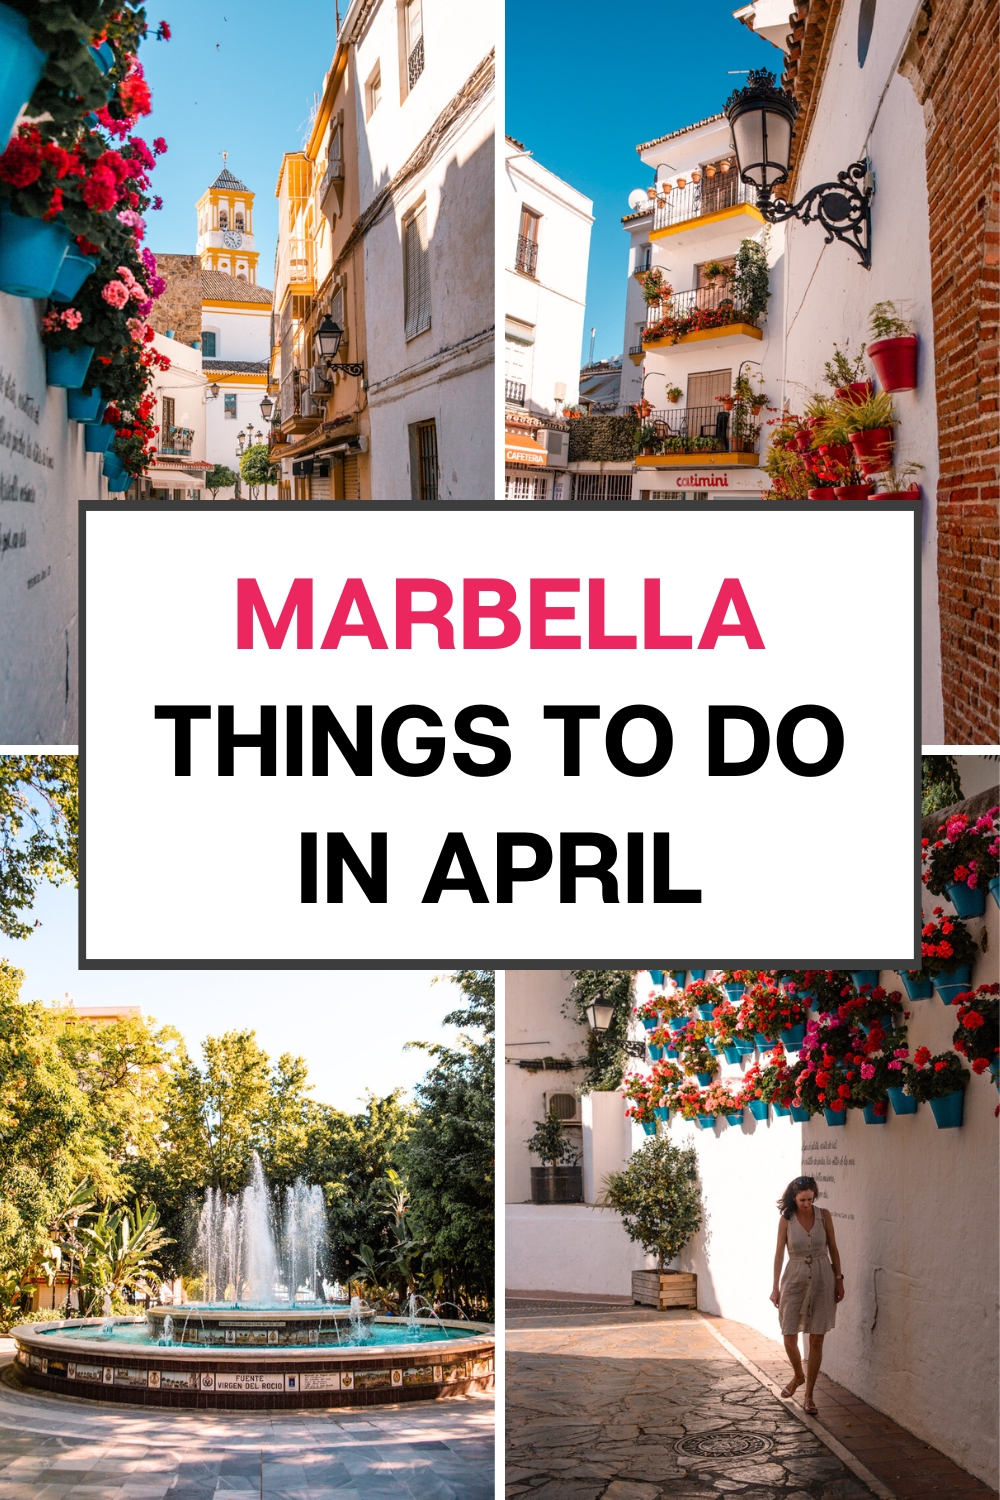 pinterest image showing the streets of marbella old town, fountain in alameda park and churches in marbella, with a headline: marbella things to do in April